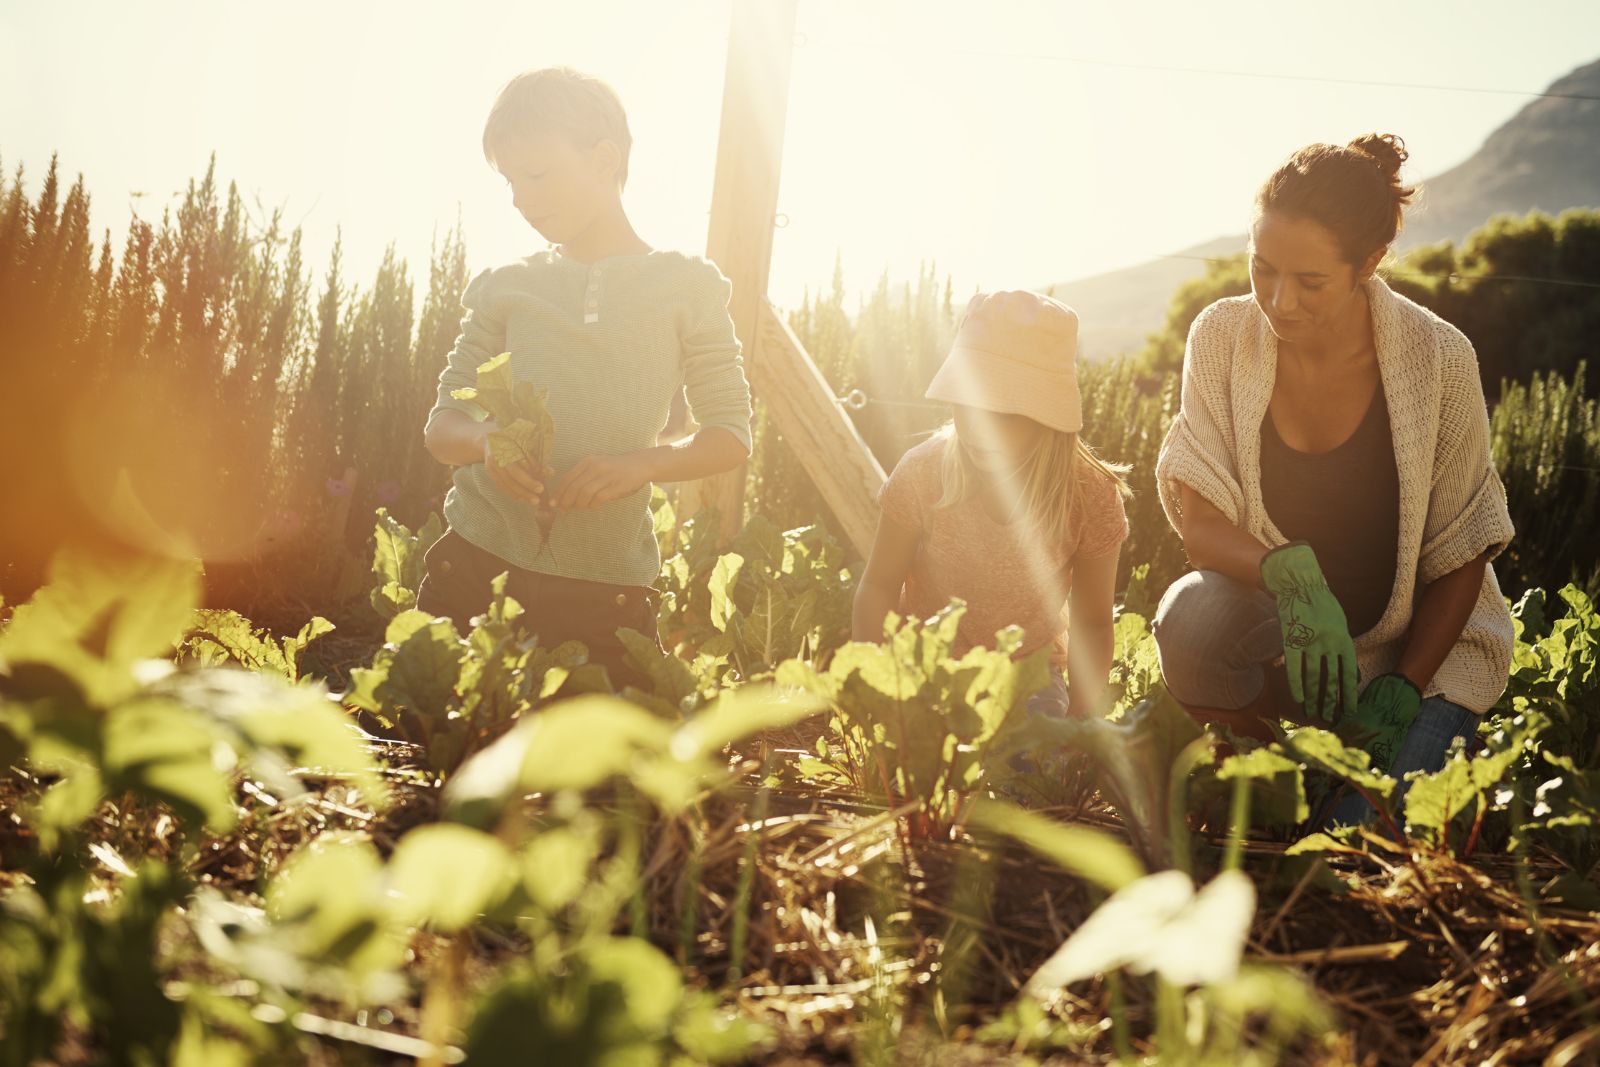 Mom gardening with teenage kids - one of the ways people experience simple living